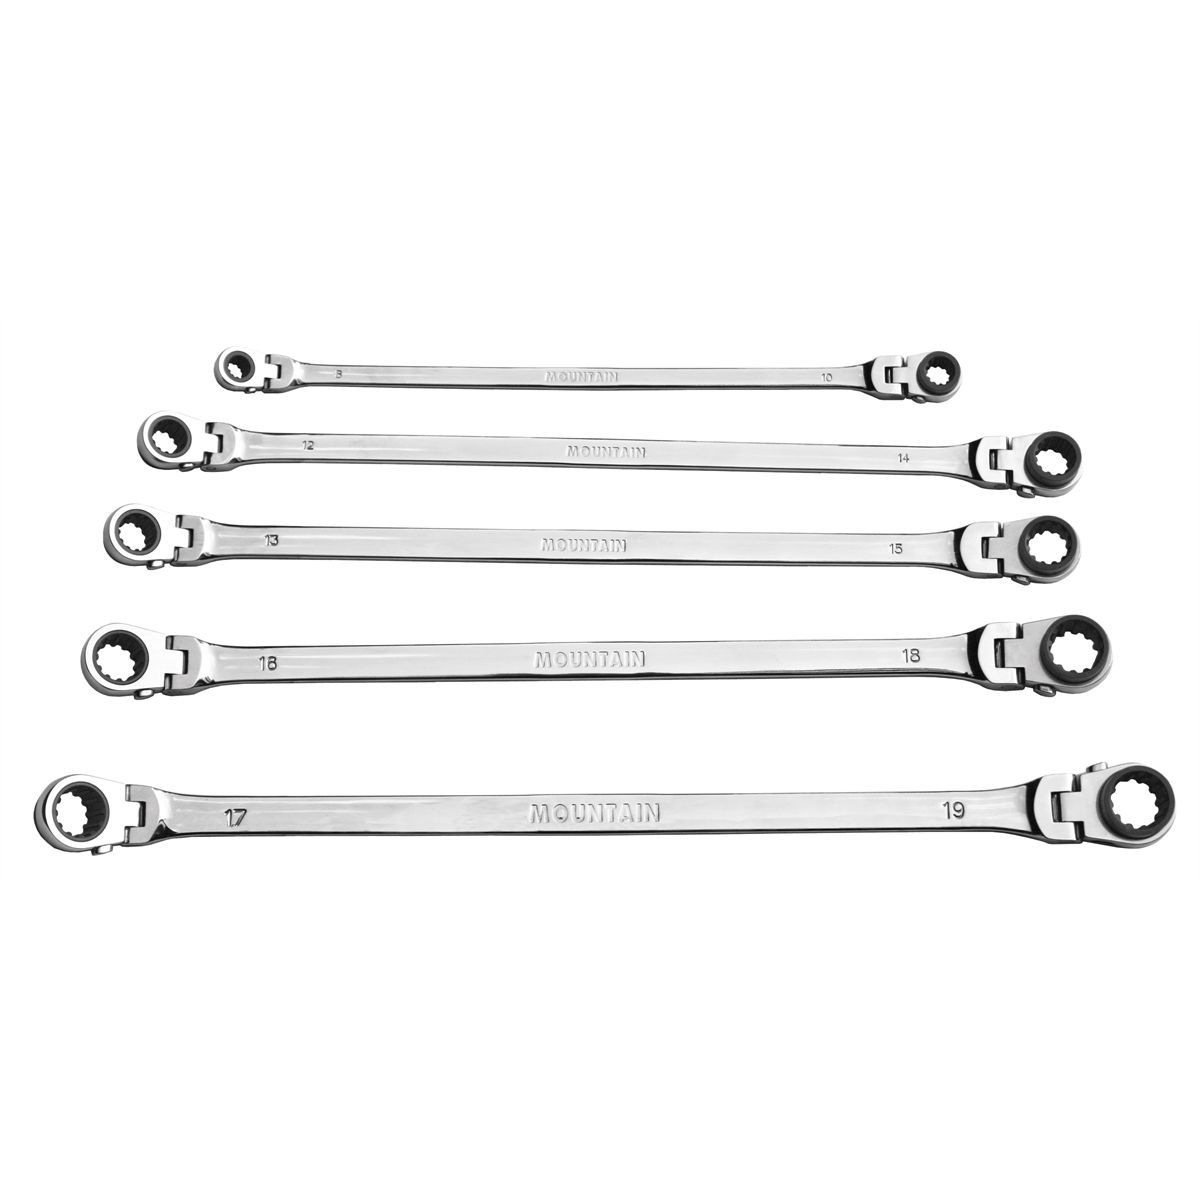 Channellock Metric Open End Wrench Set 5-Piece 